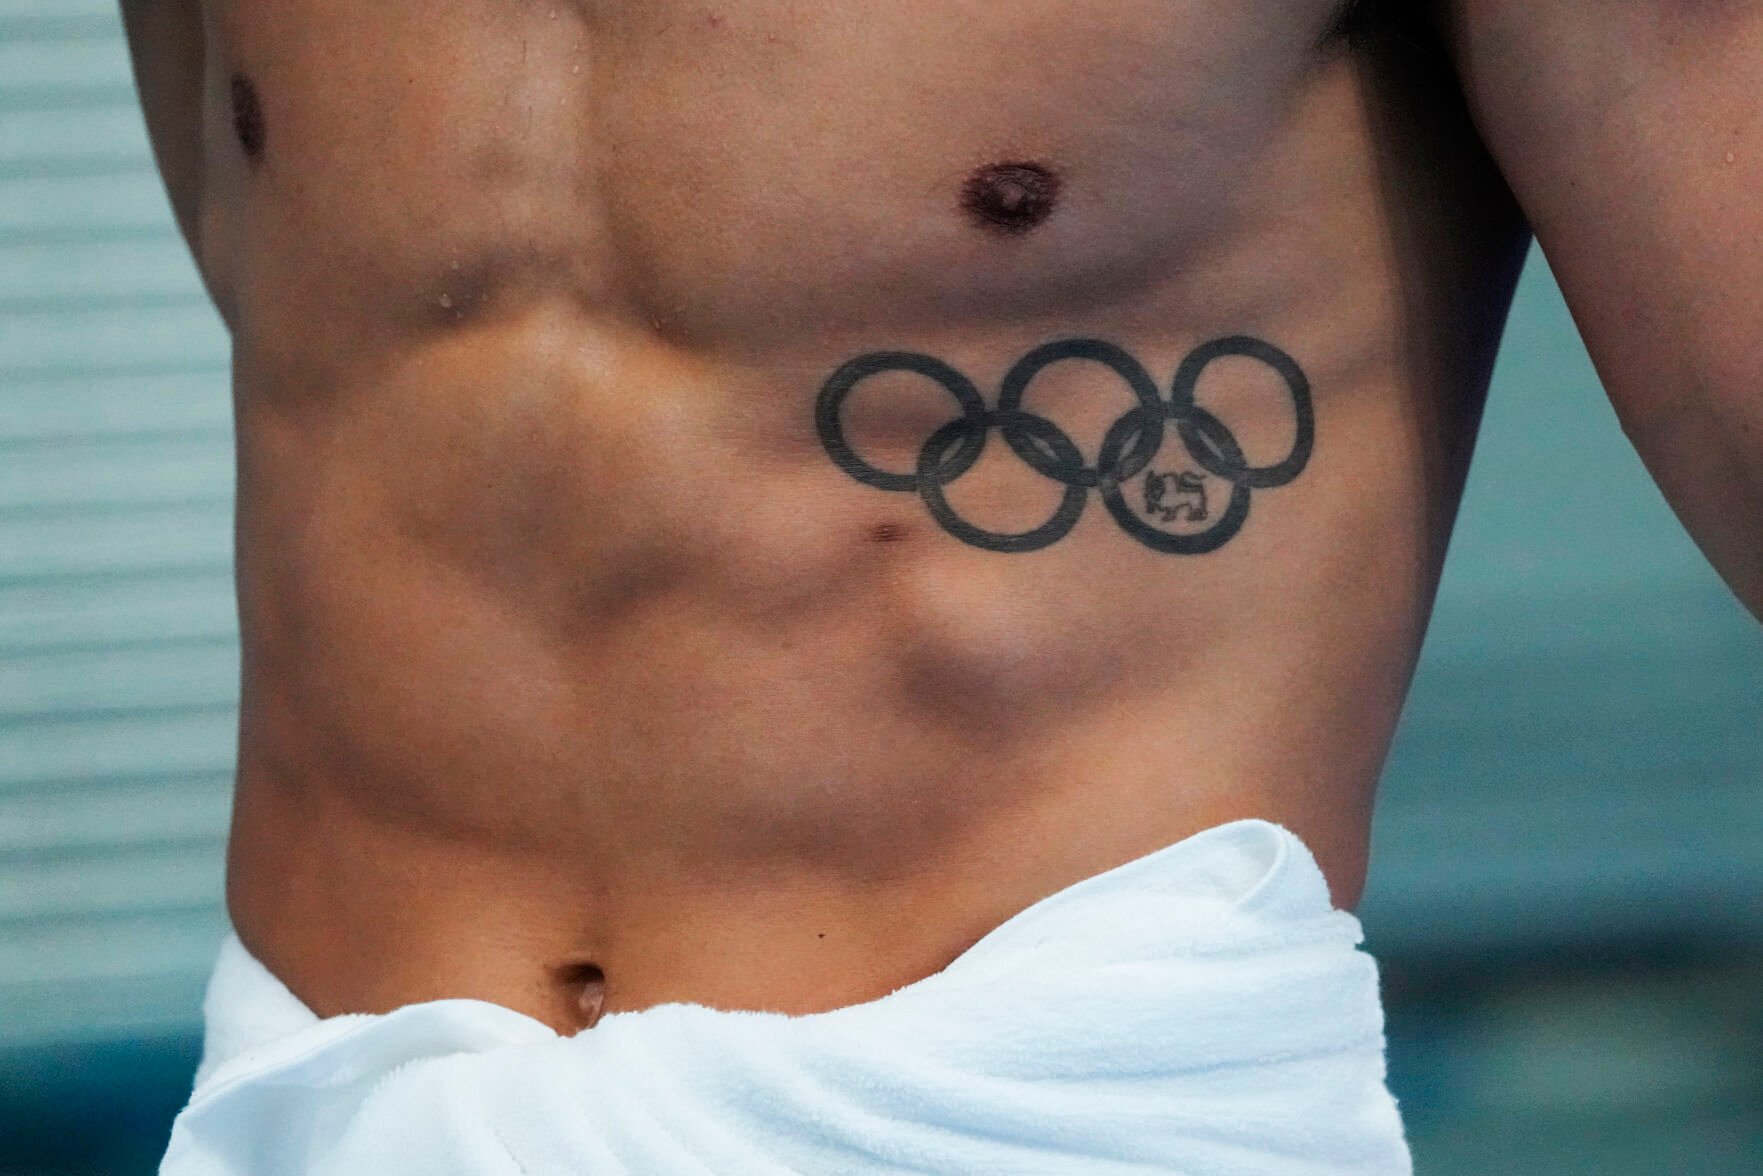 IOC back Olympic Rings tattoos at Rio 2016 after swimmer's disqualification